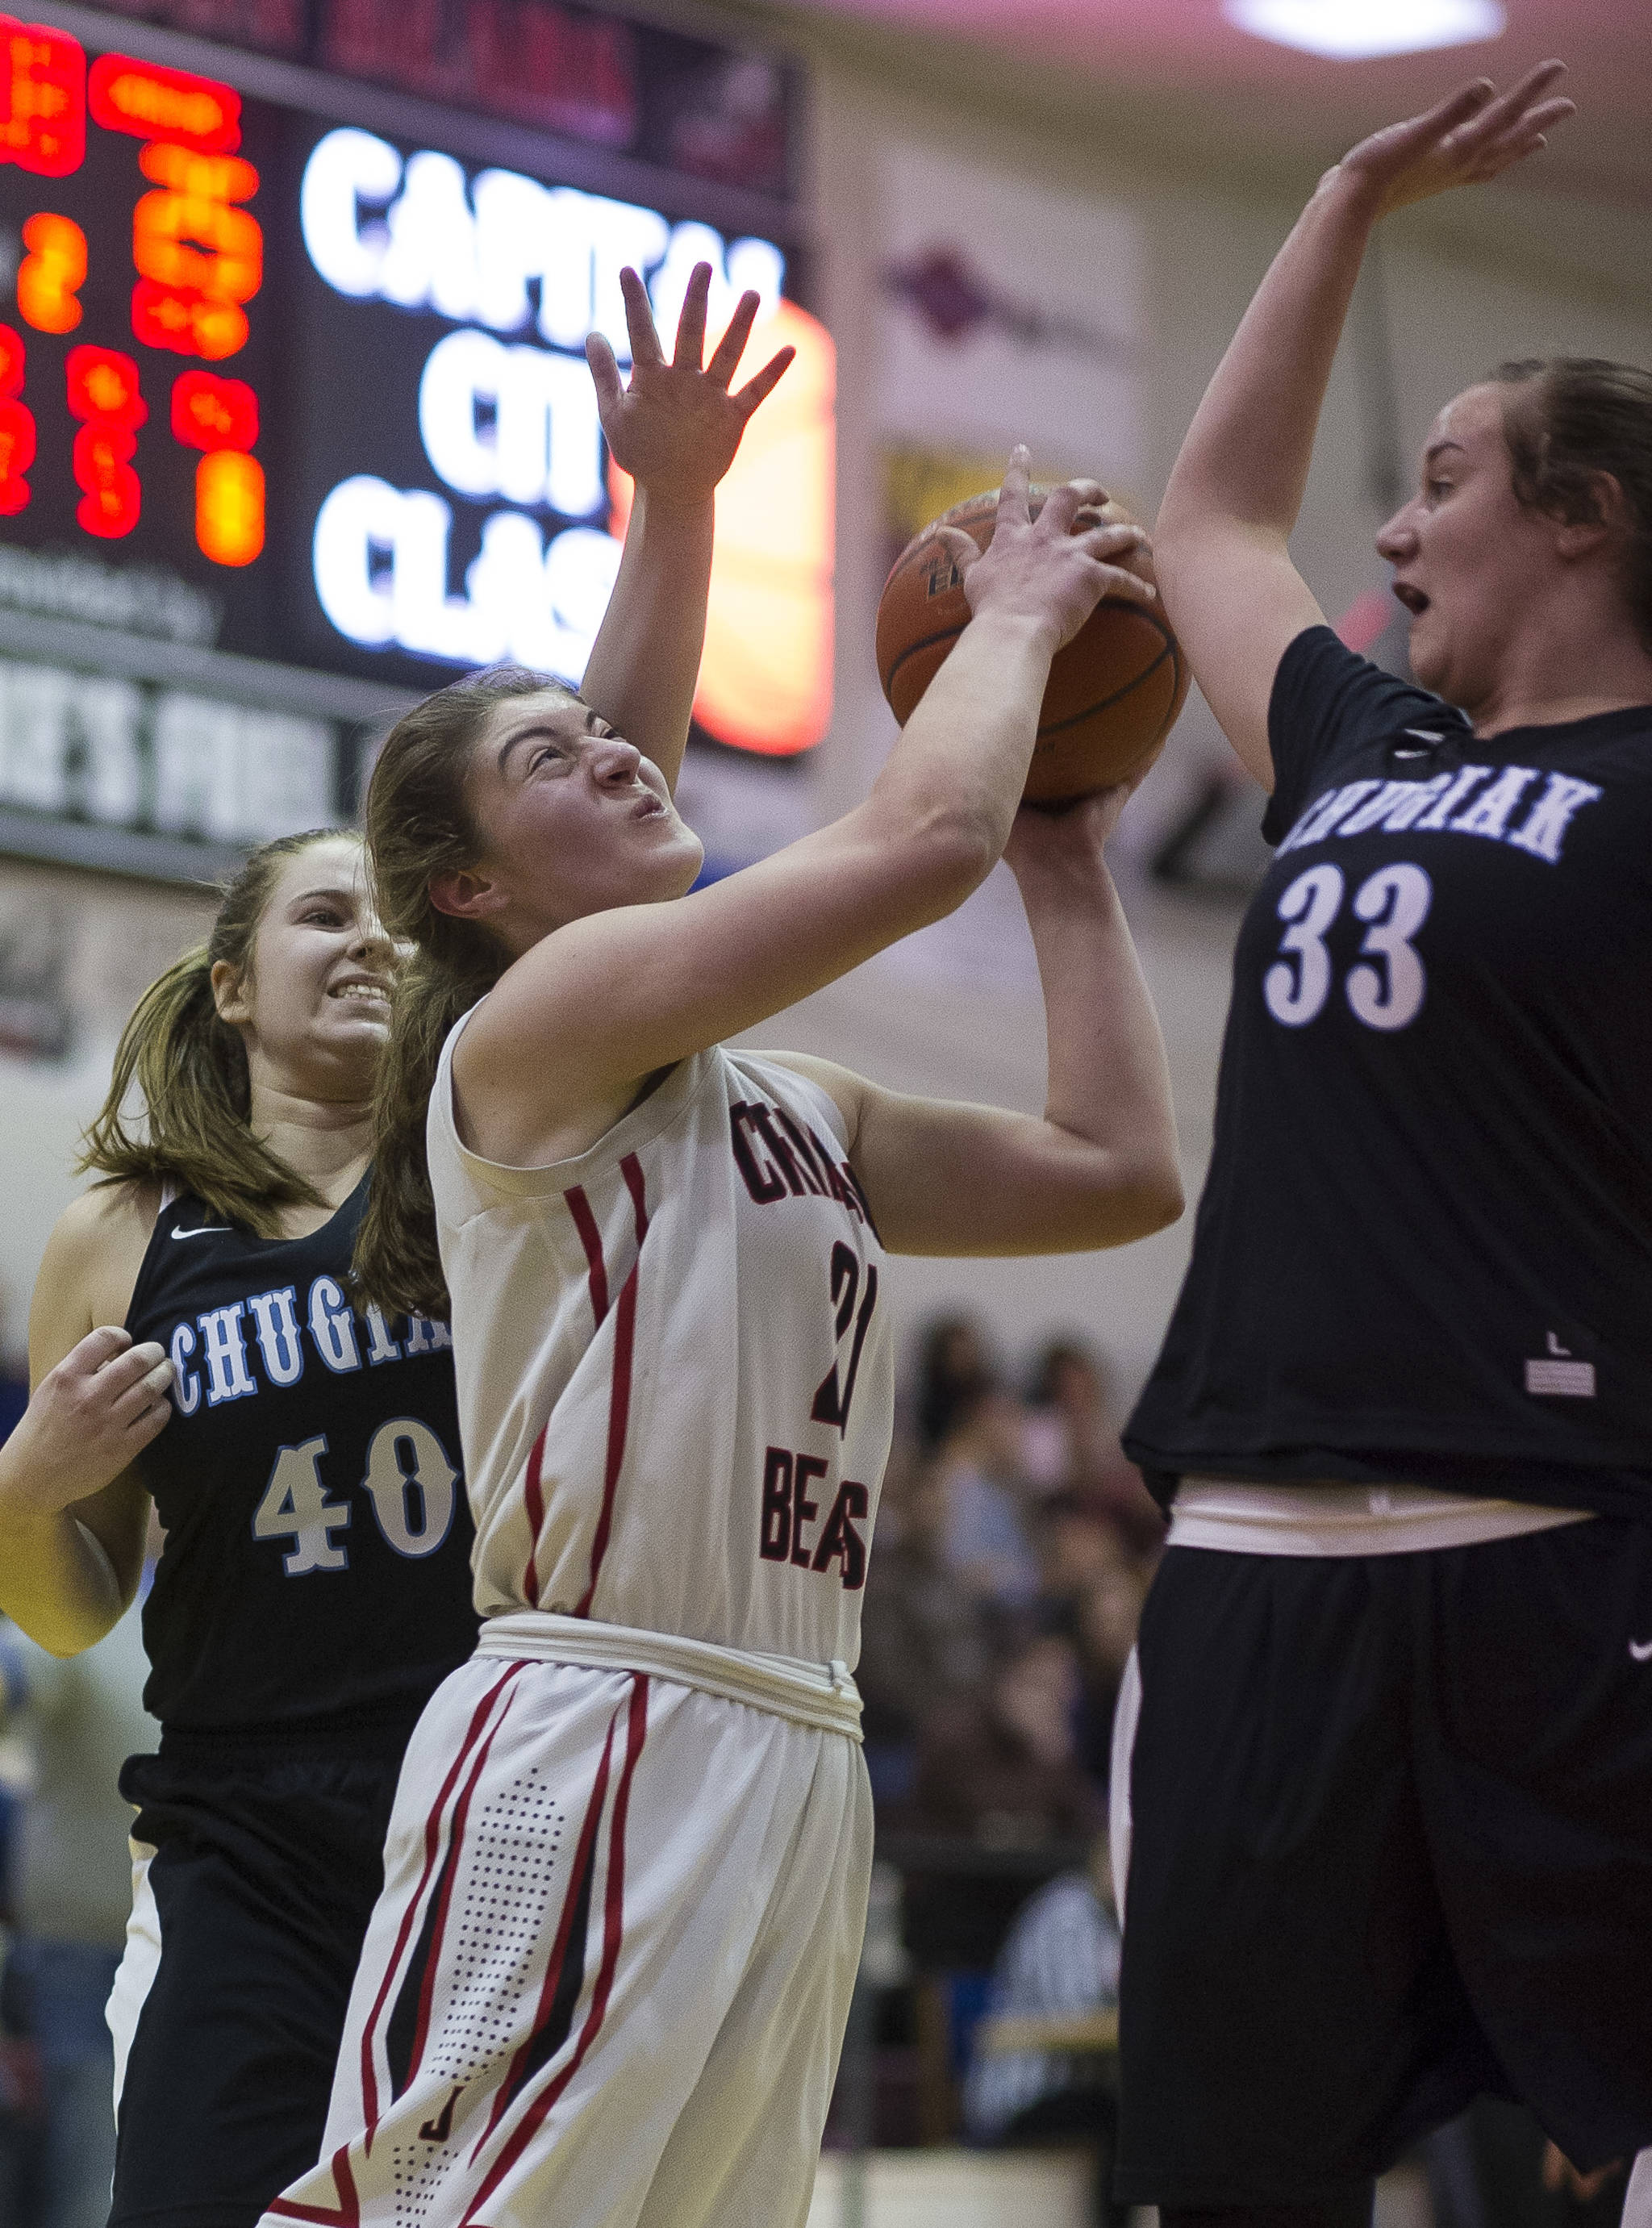 Juneau-Douglas’ Cassie Dzinich, center, goes for a basket against Chugiak’s Patricia Houser, right, and Layla Beam, left, during their Capital City Classic Basketball Tournament game at JDHS on Saturday, Dec. 30, 2017. (Michael Penn | Juneau Empire)